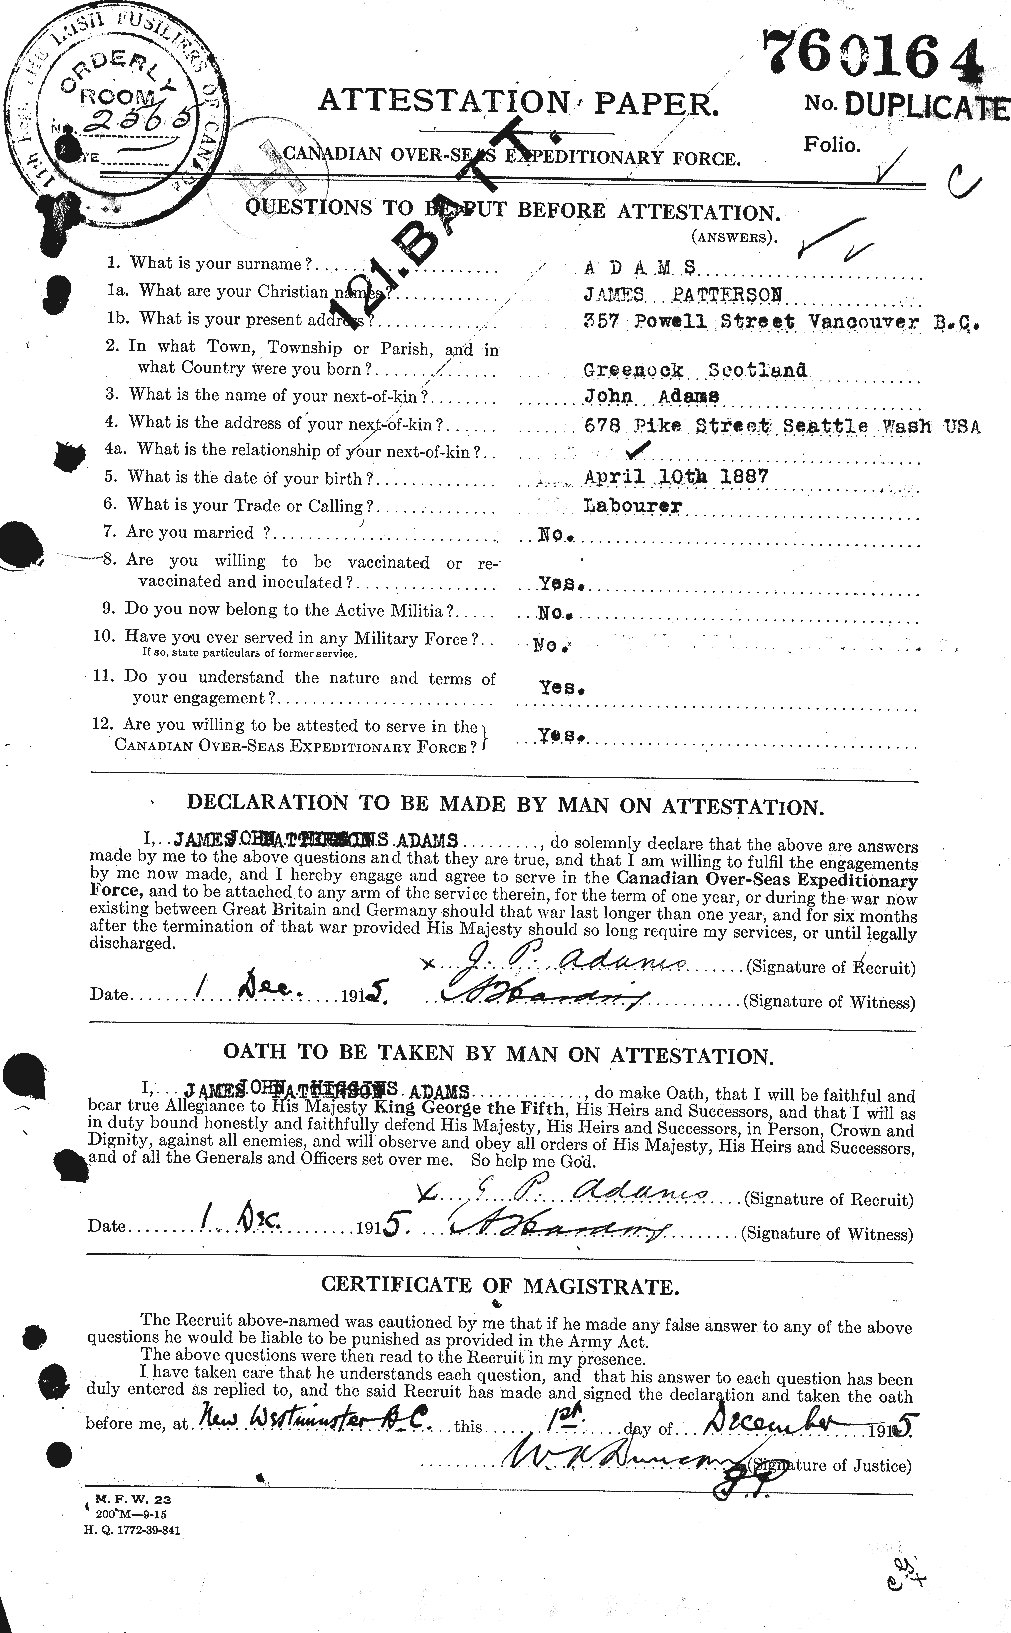 Personnel Records of the First World War - CEF 201856a